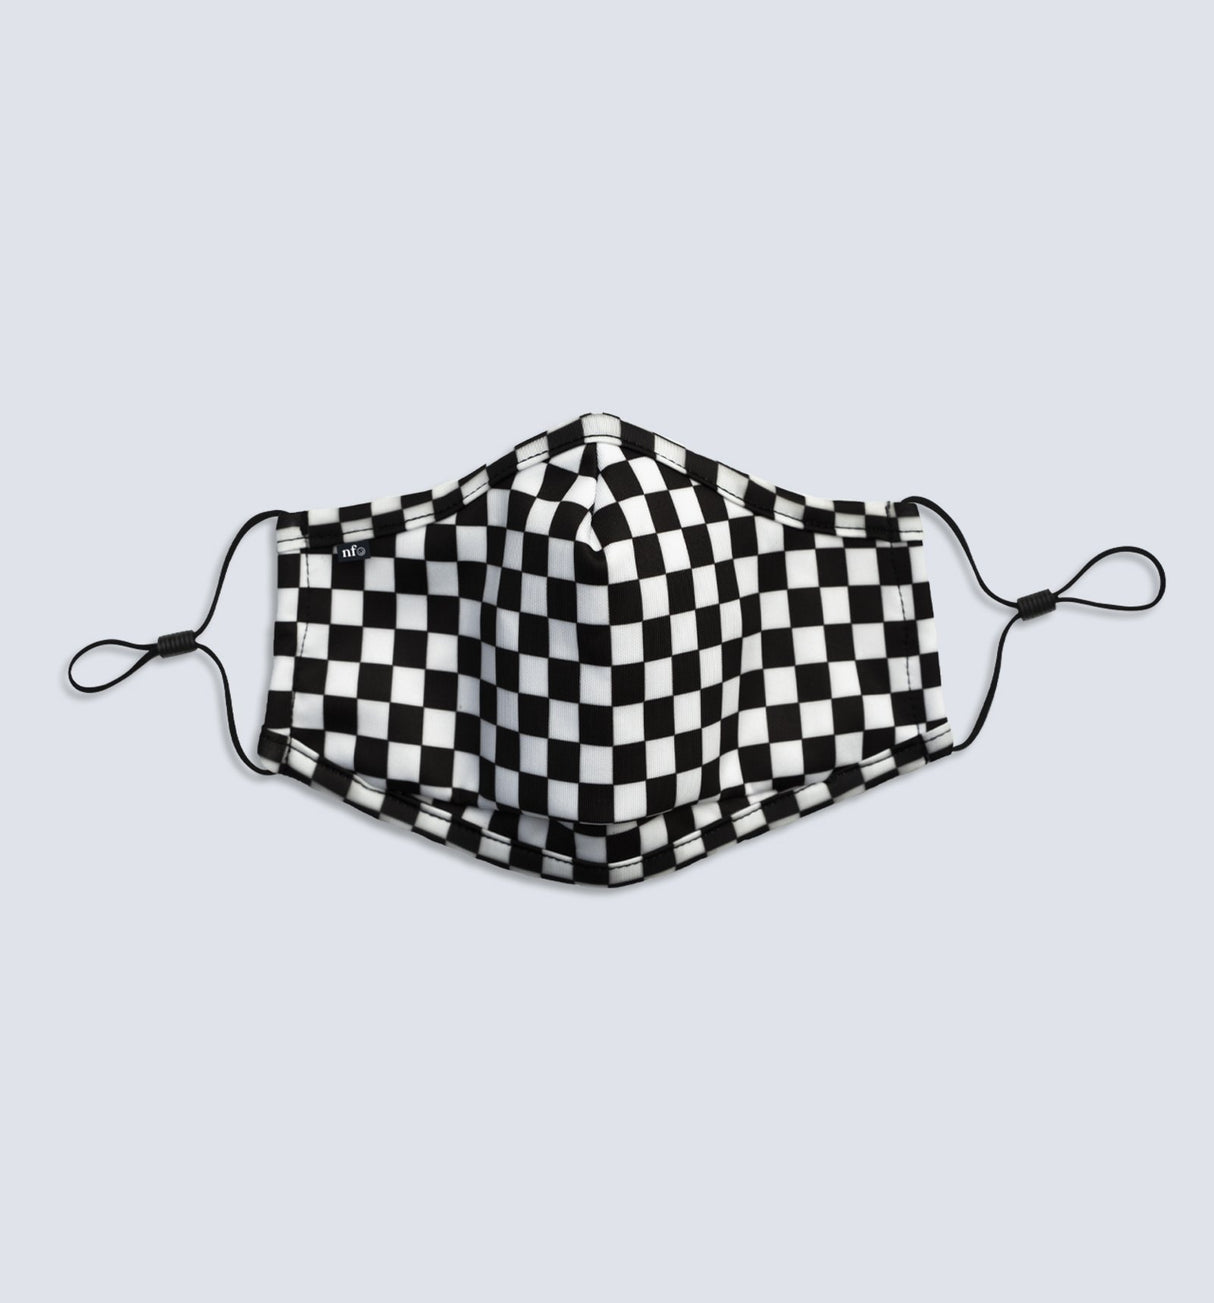 NiiceFace Checkerboard Black Face Mask